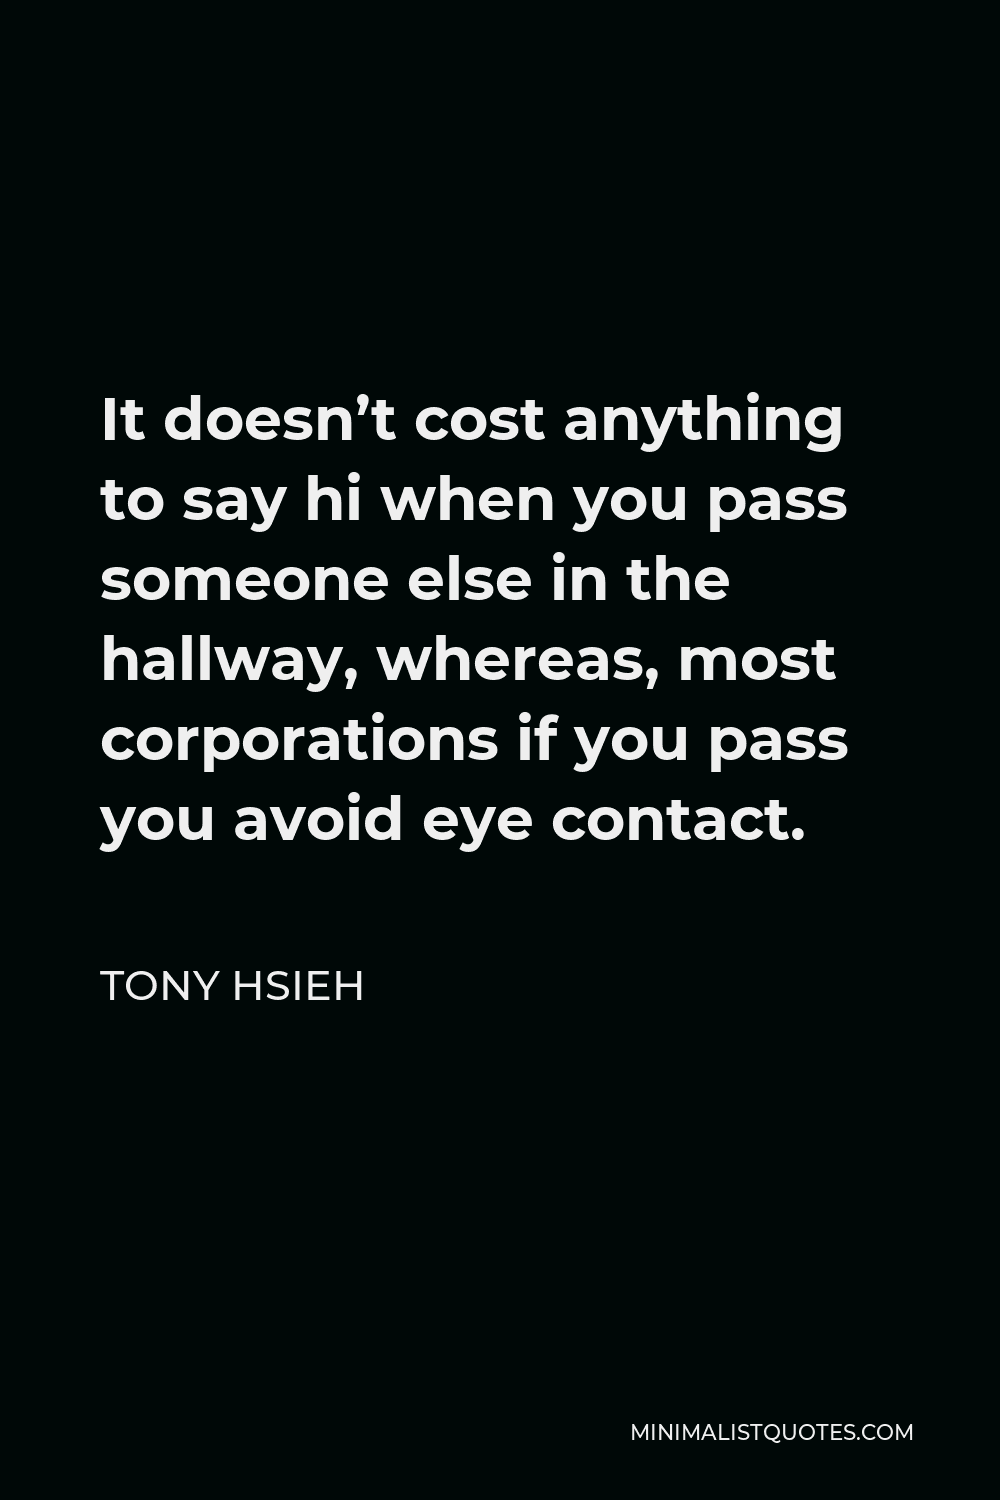 Tony Hsieh Quote - It doesn’t cost anything to say hi when you pass someone else in the hallway, whereas, most corporations if you pass you avoid eye contact.